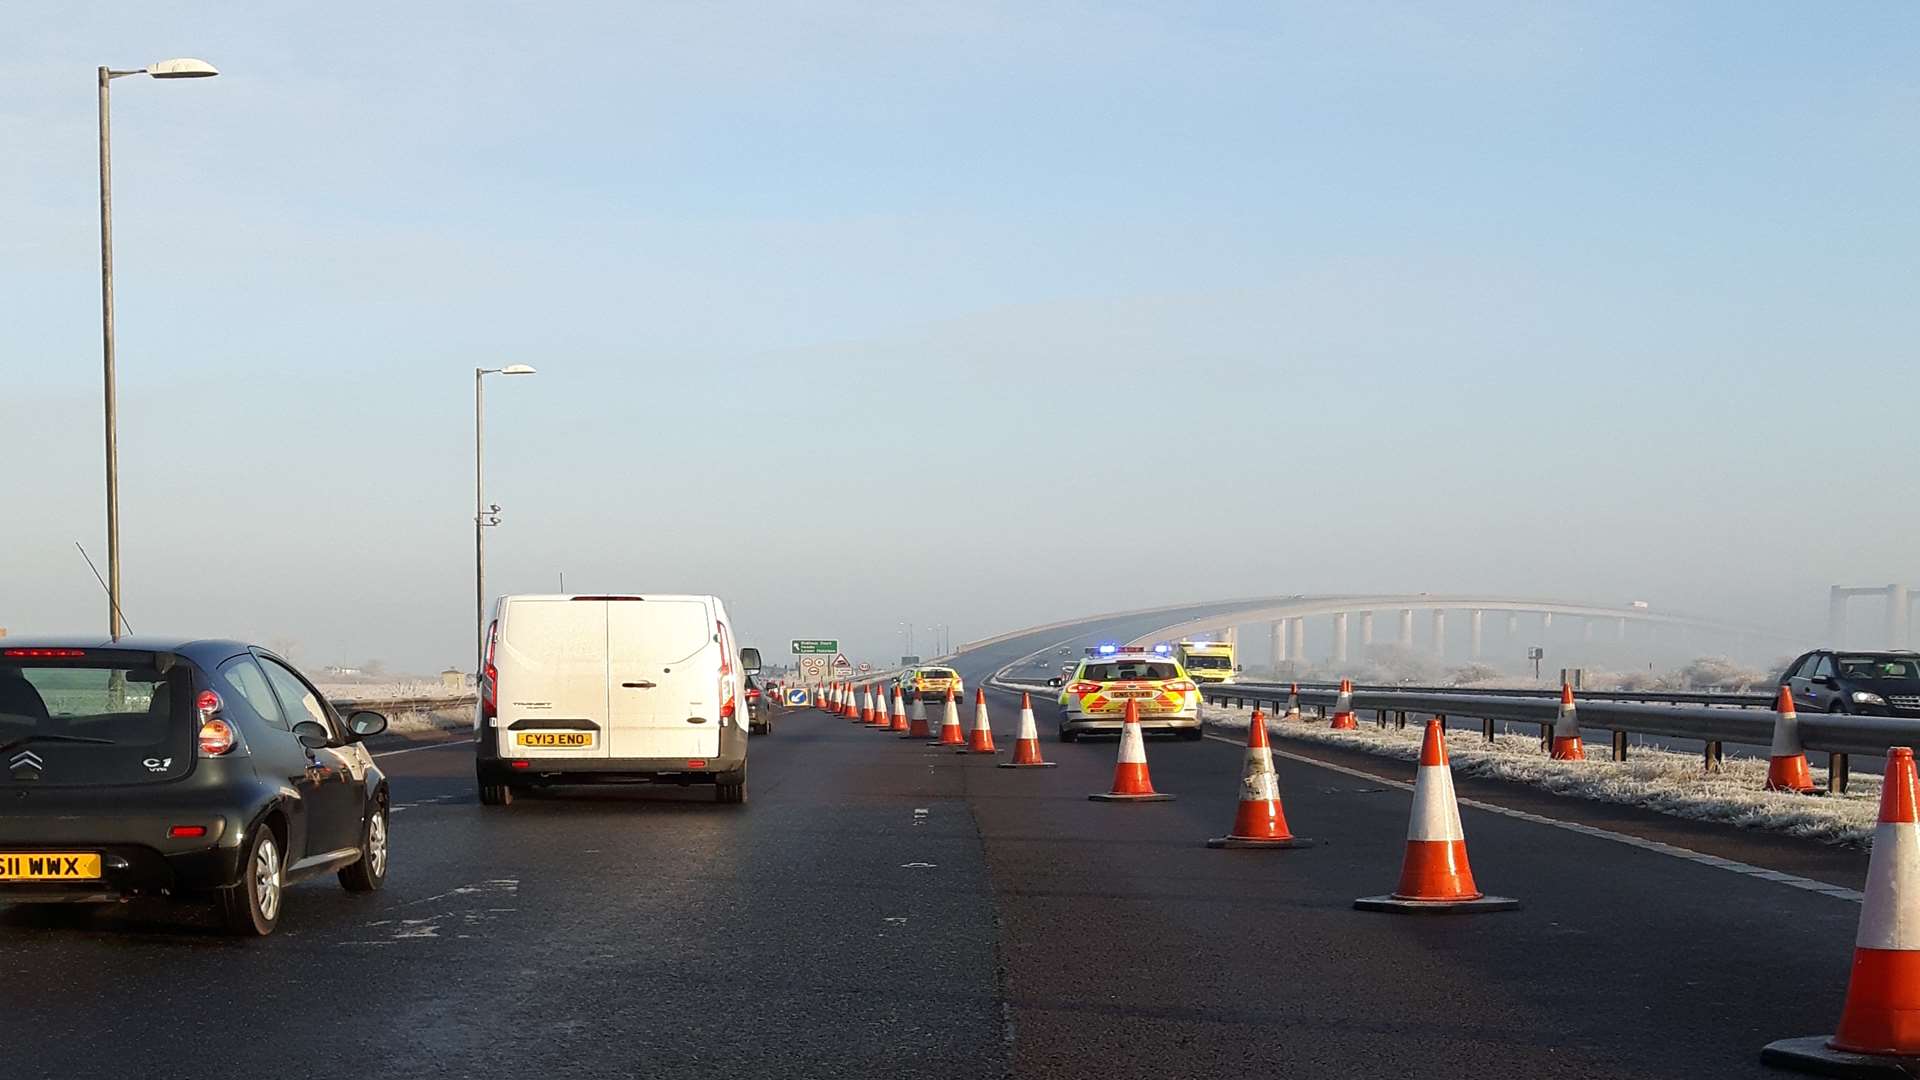 Police shut off the Sheppey Crossing